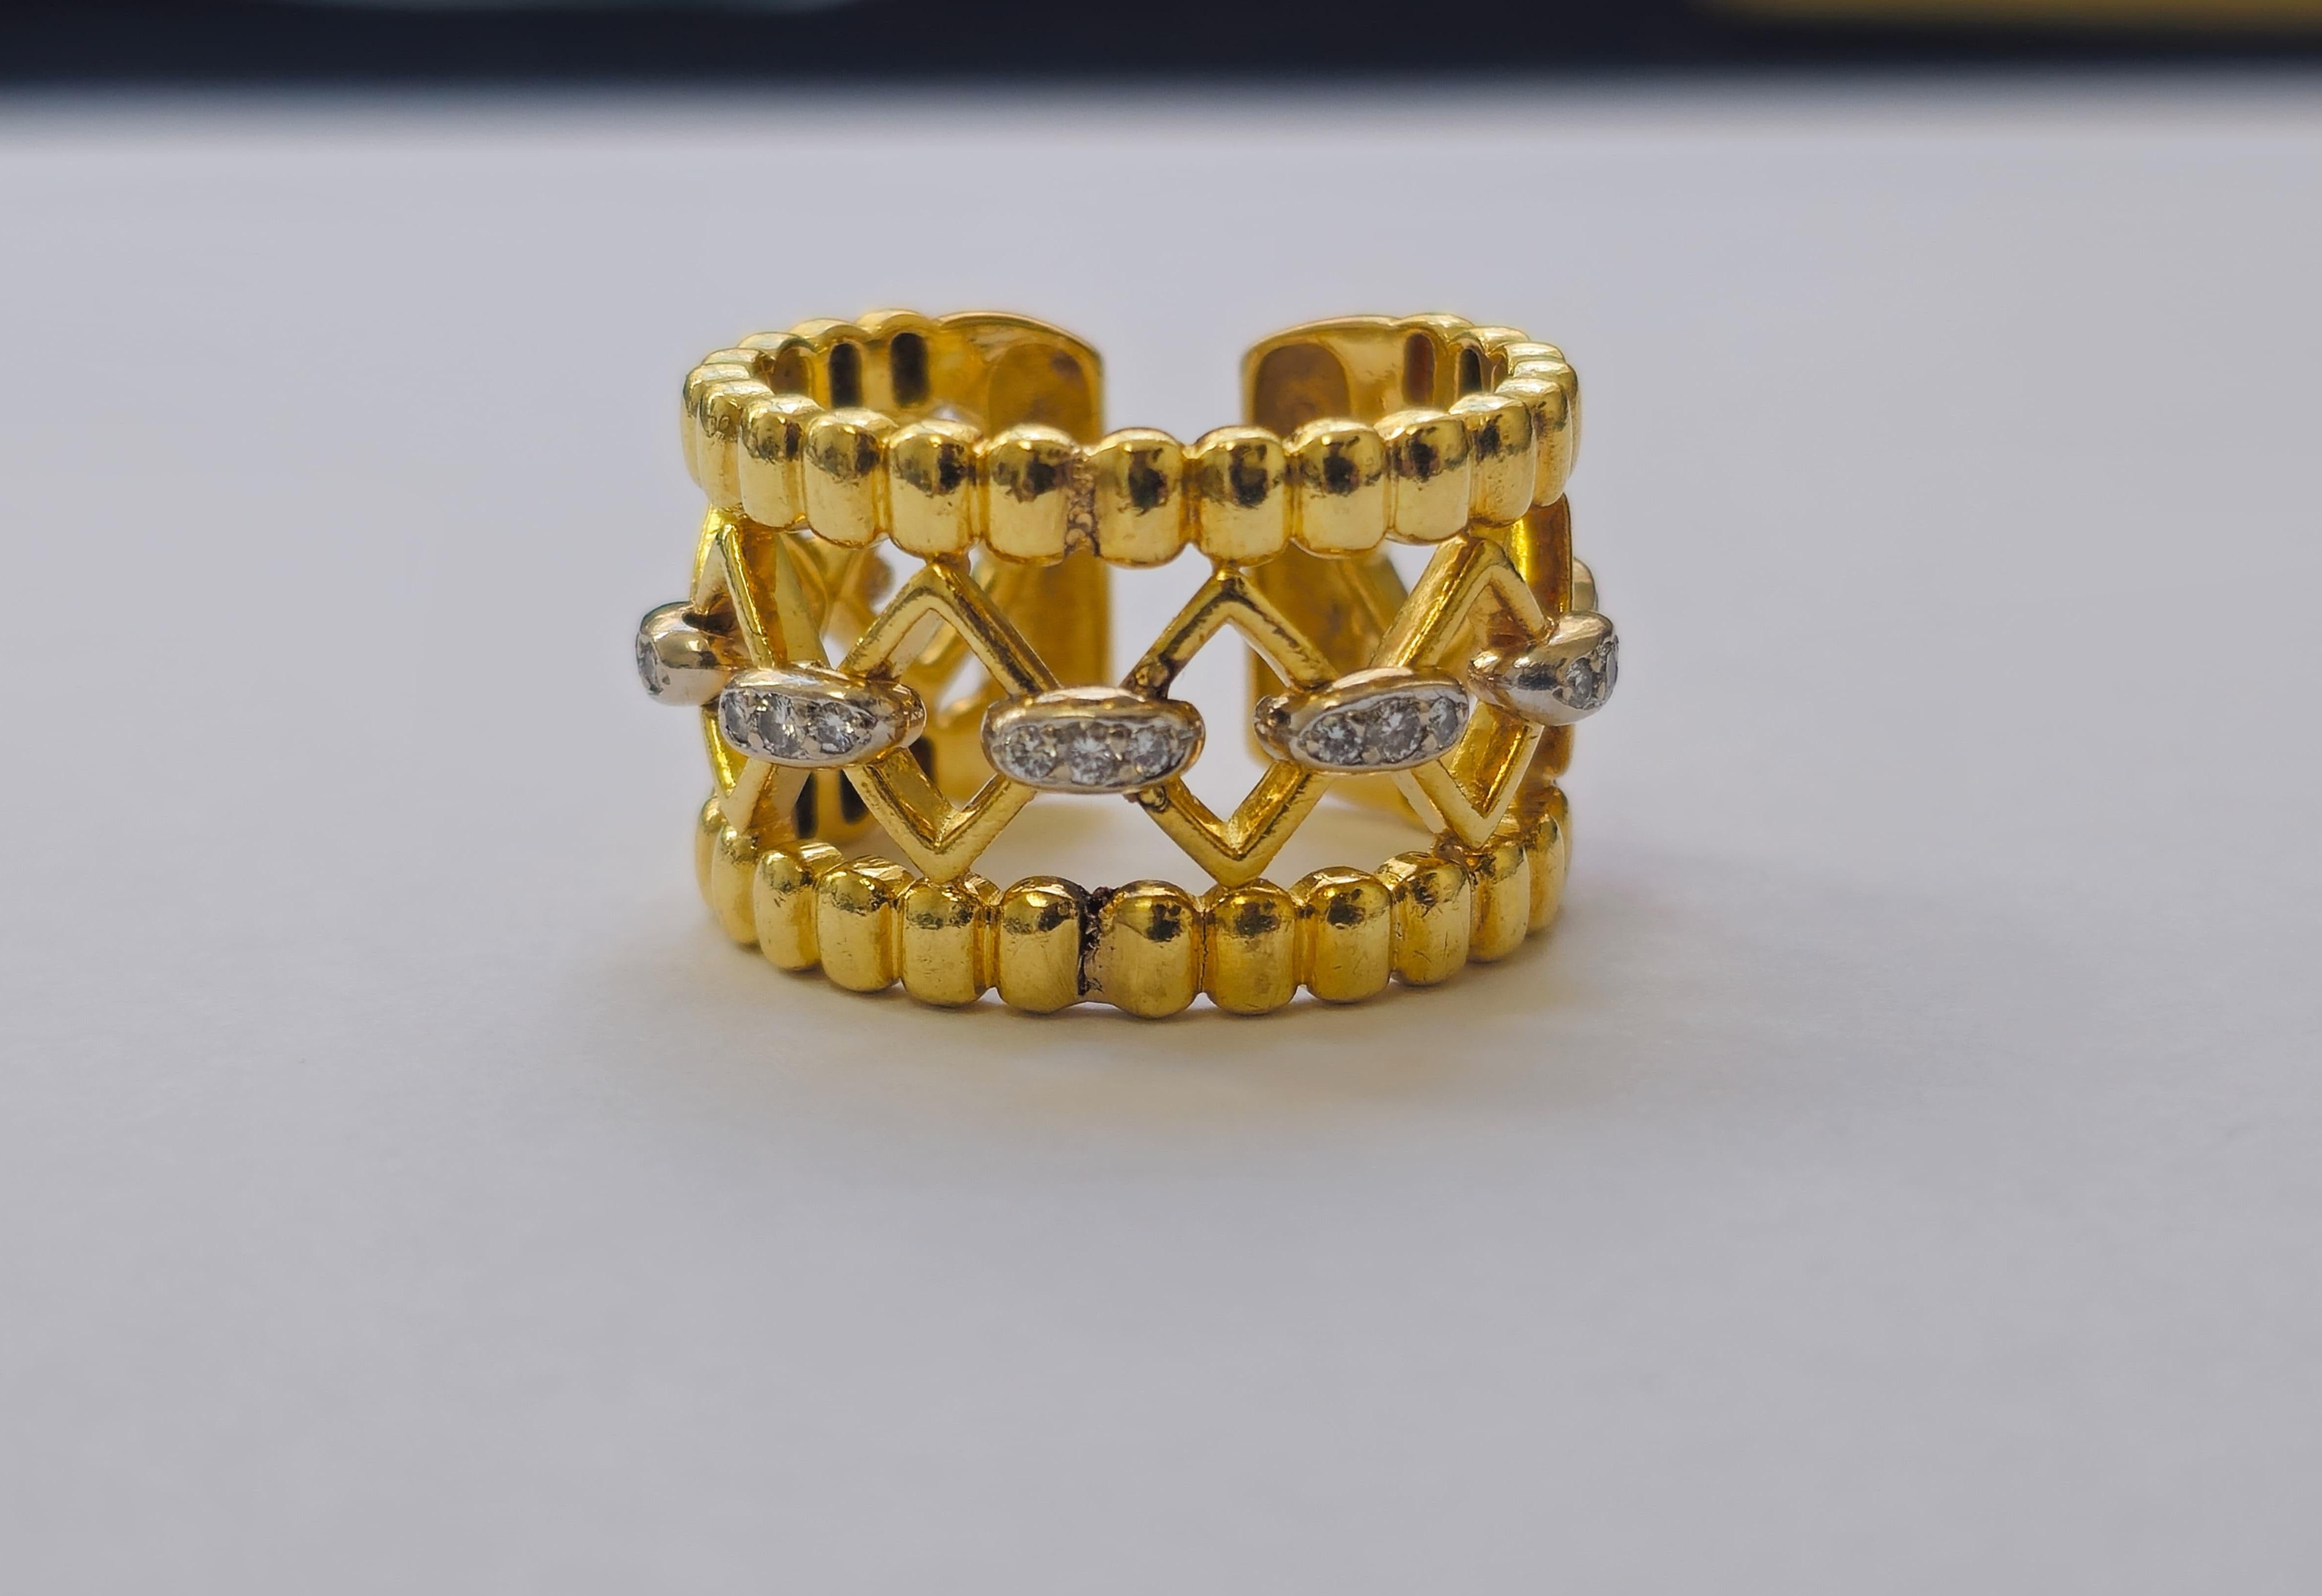 Stunning Ladies Ring in 18K Yellow Gold In Excellent Condition For Sale In Miami, FL